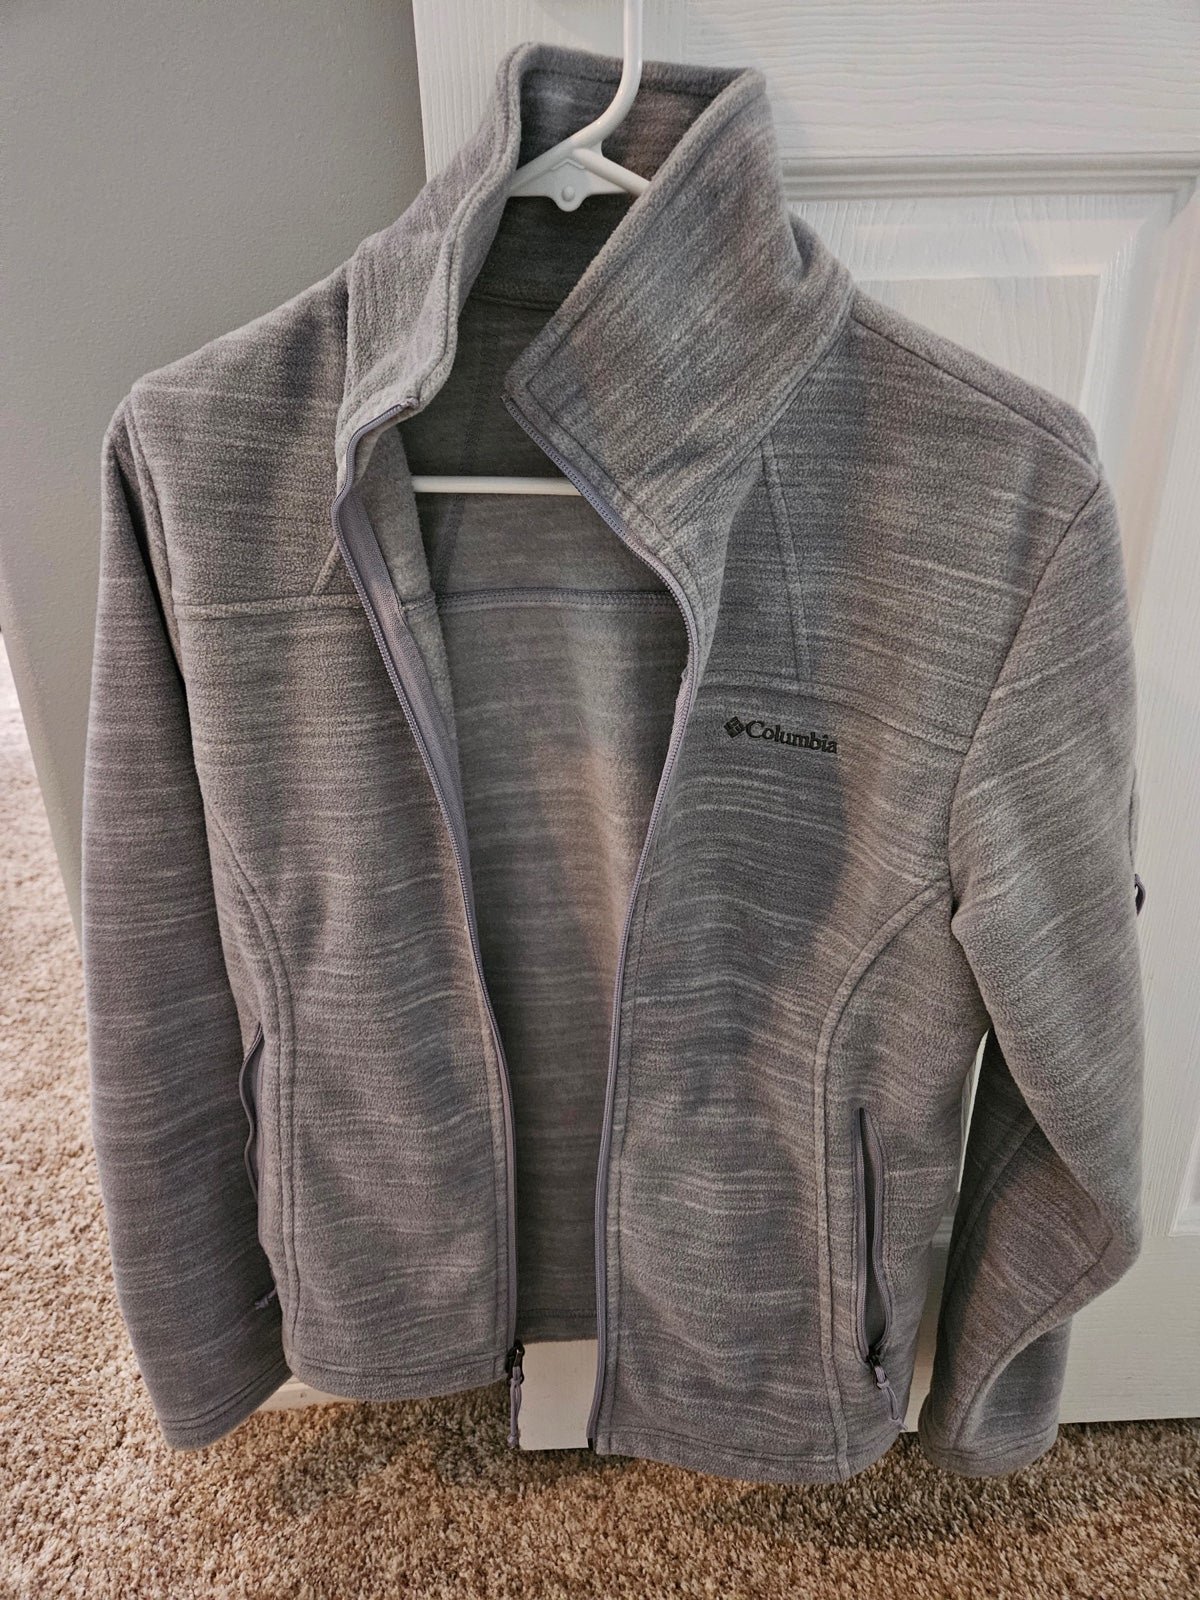 Affordable Columbia Women´s Benton Springs full zip- size Small - light gray jcpwhkSk9 just for you